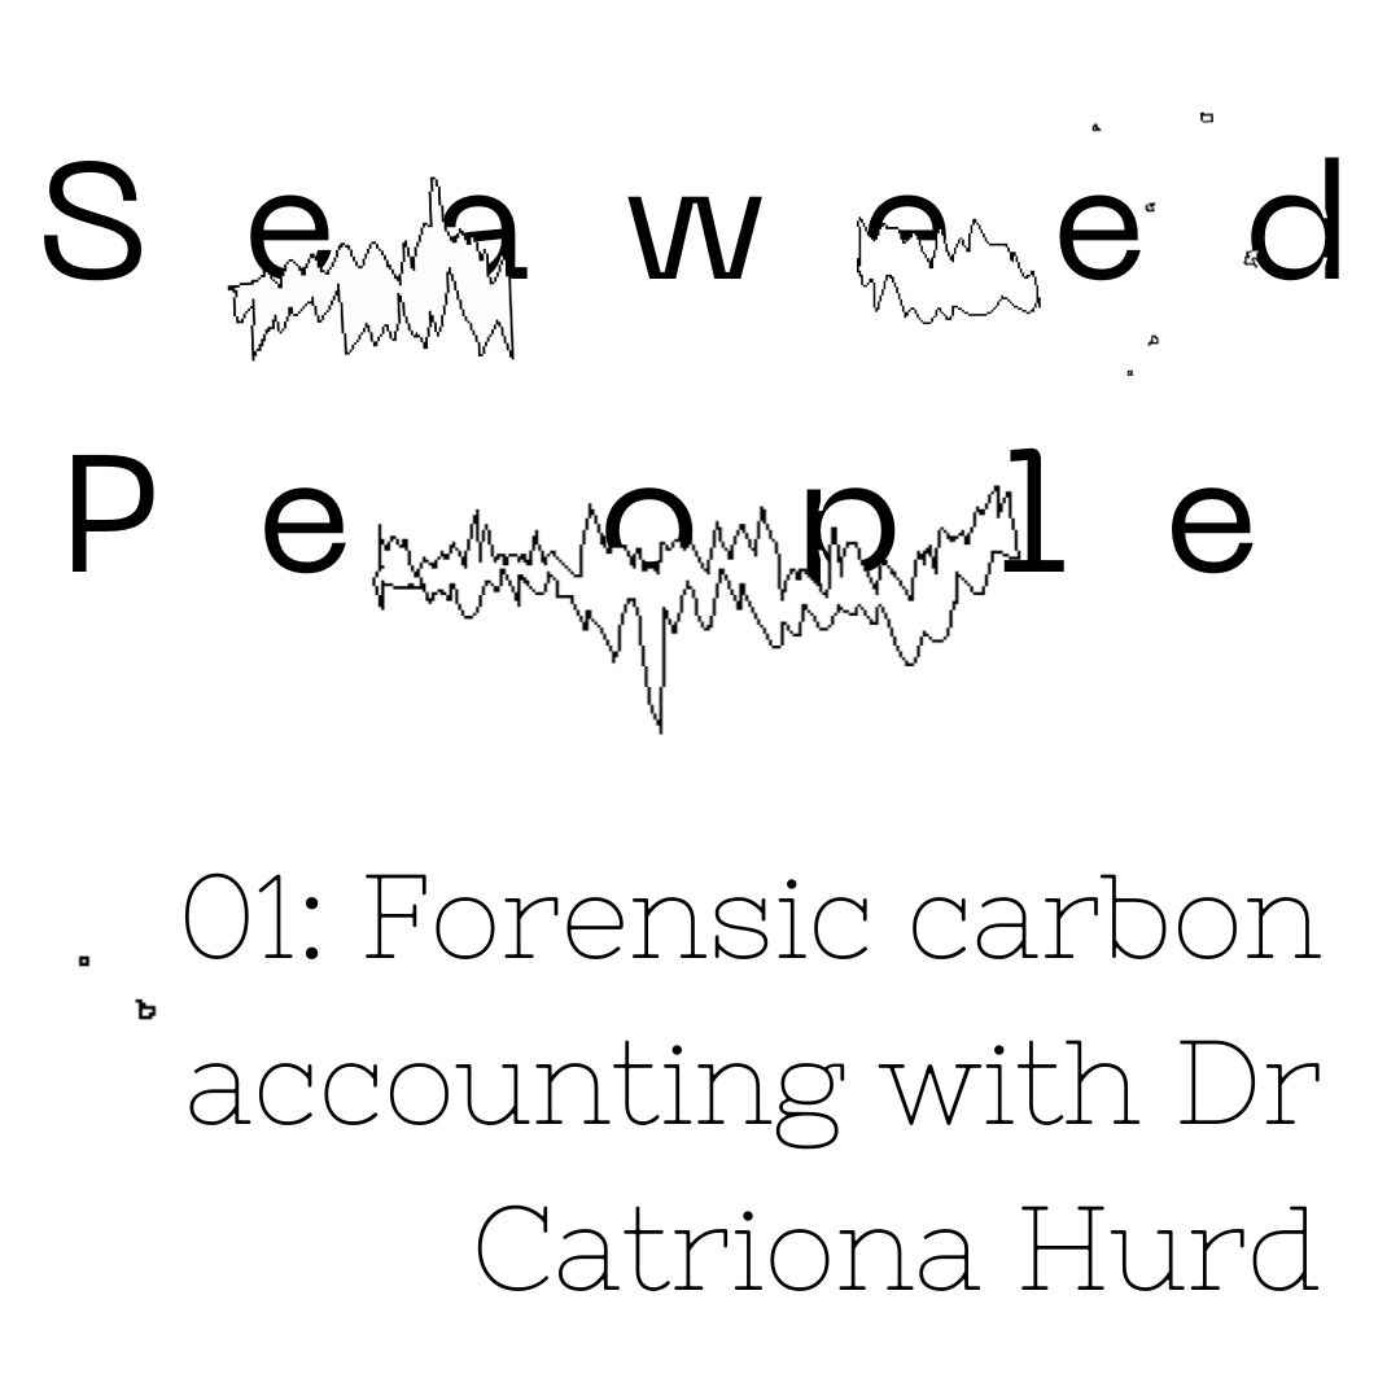 Forensic carbon accounting with Dr Catriona Hurd